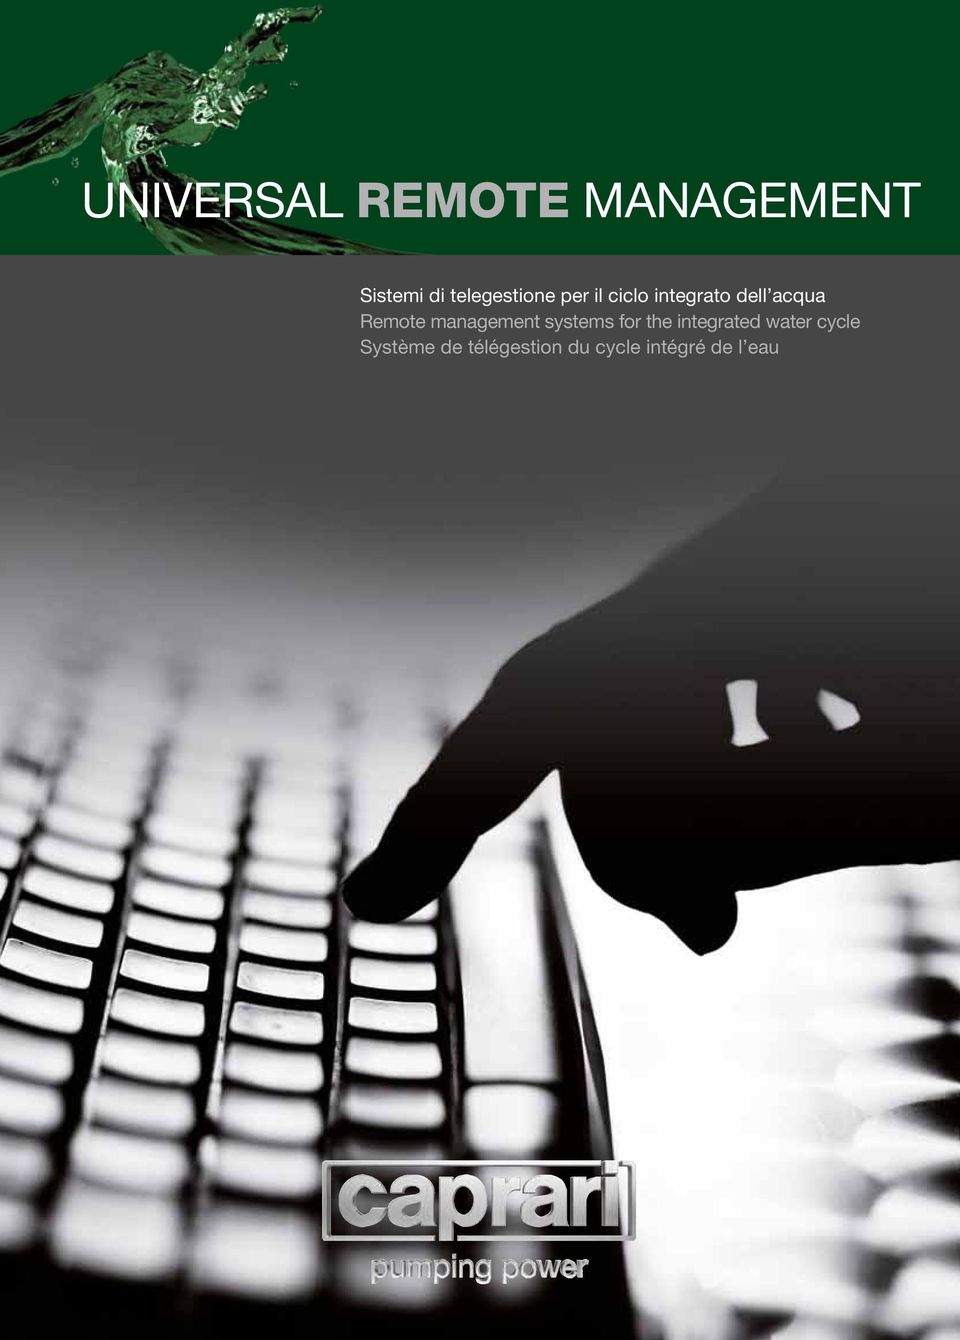 Remote management systems for the integrated